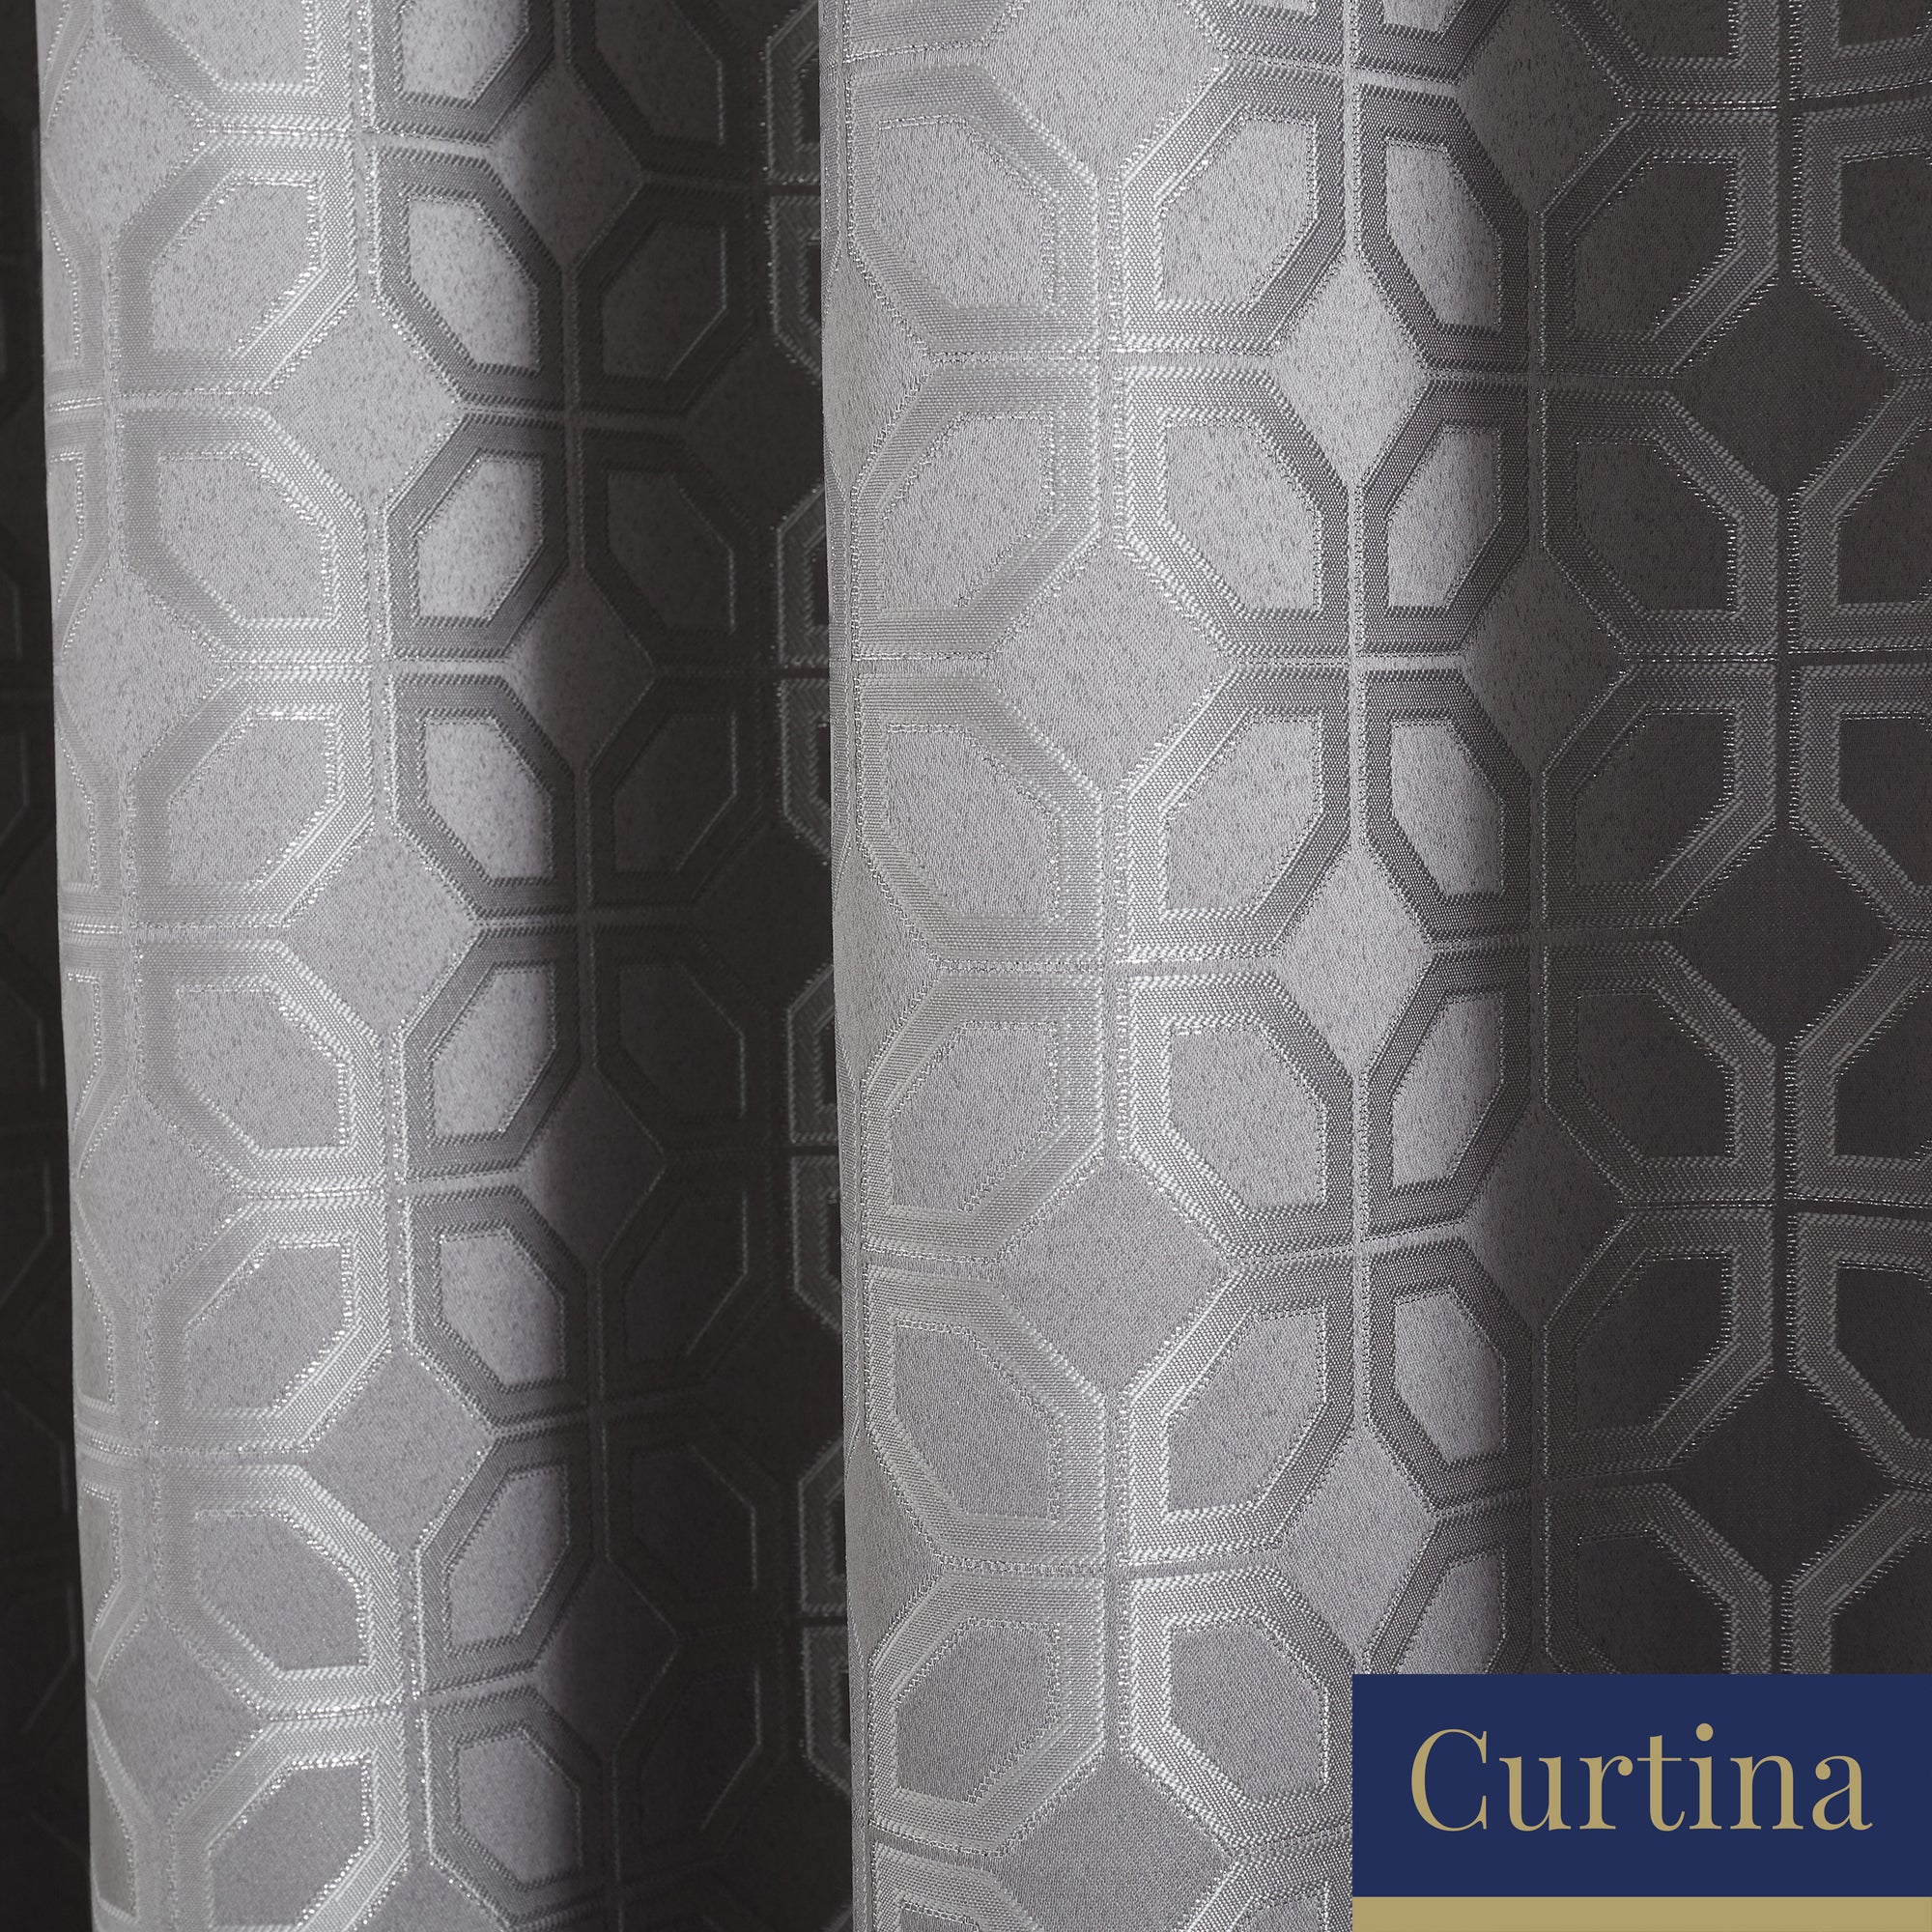 Oriental Squares - Geometric Metallic Jacquard Eyelet Curtains in Silver - By Curtina